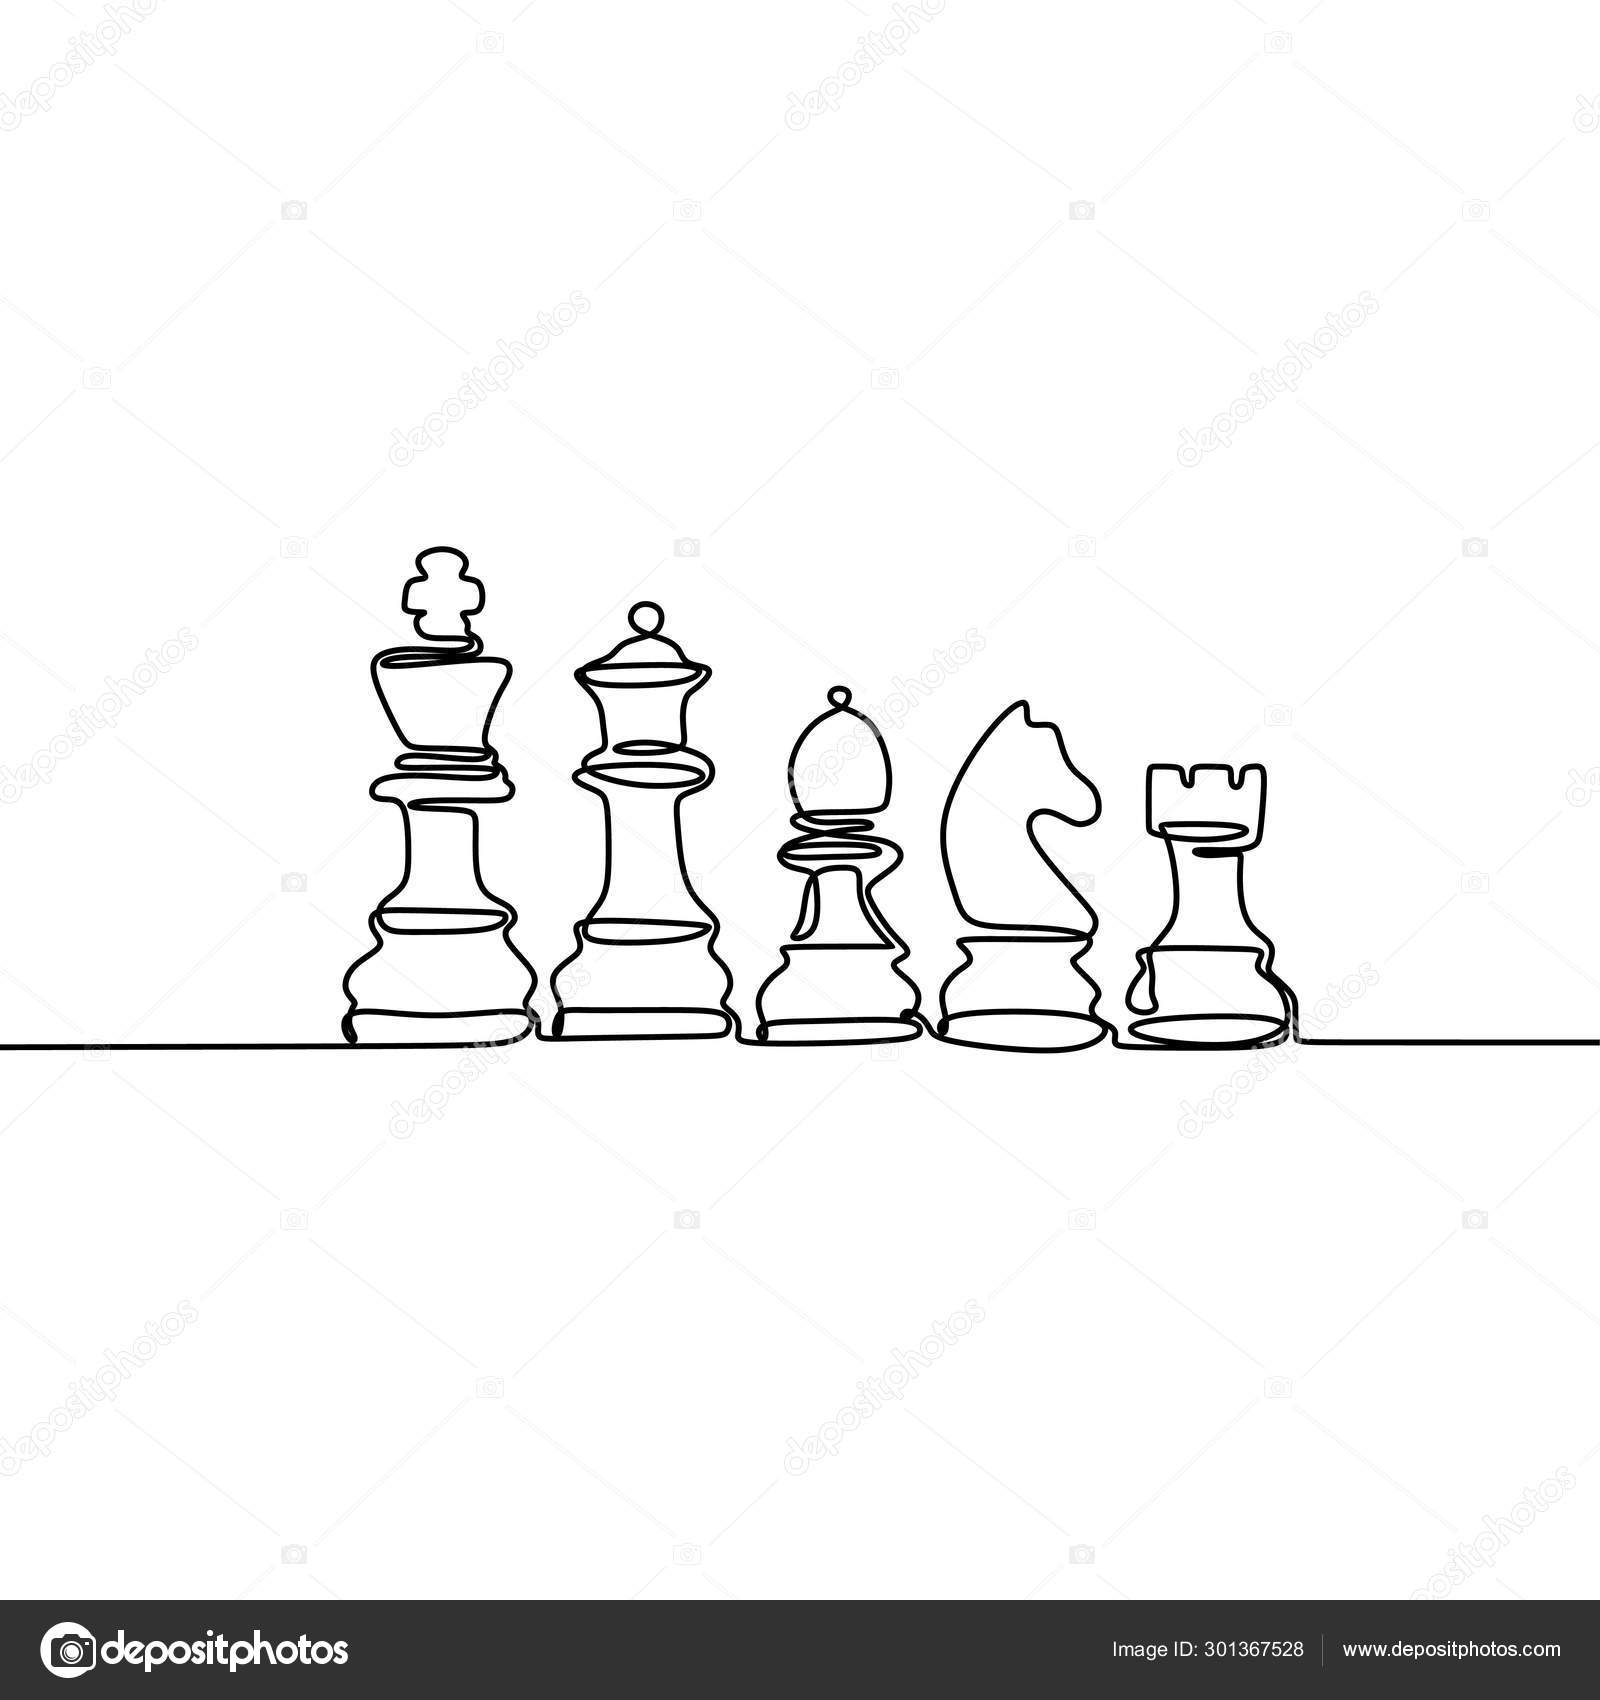 Pawn - chess piece isolated on white background. Hand drawn sketch